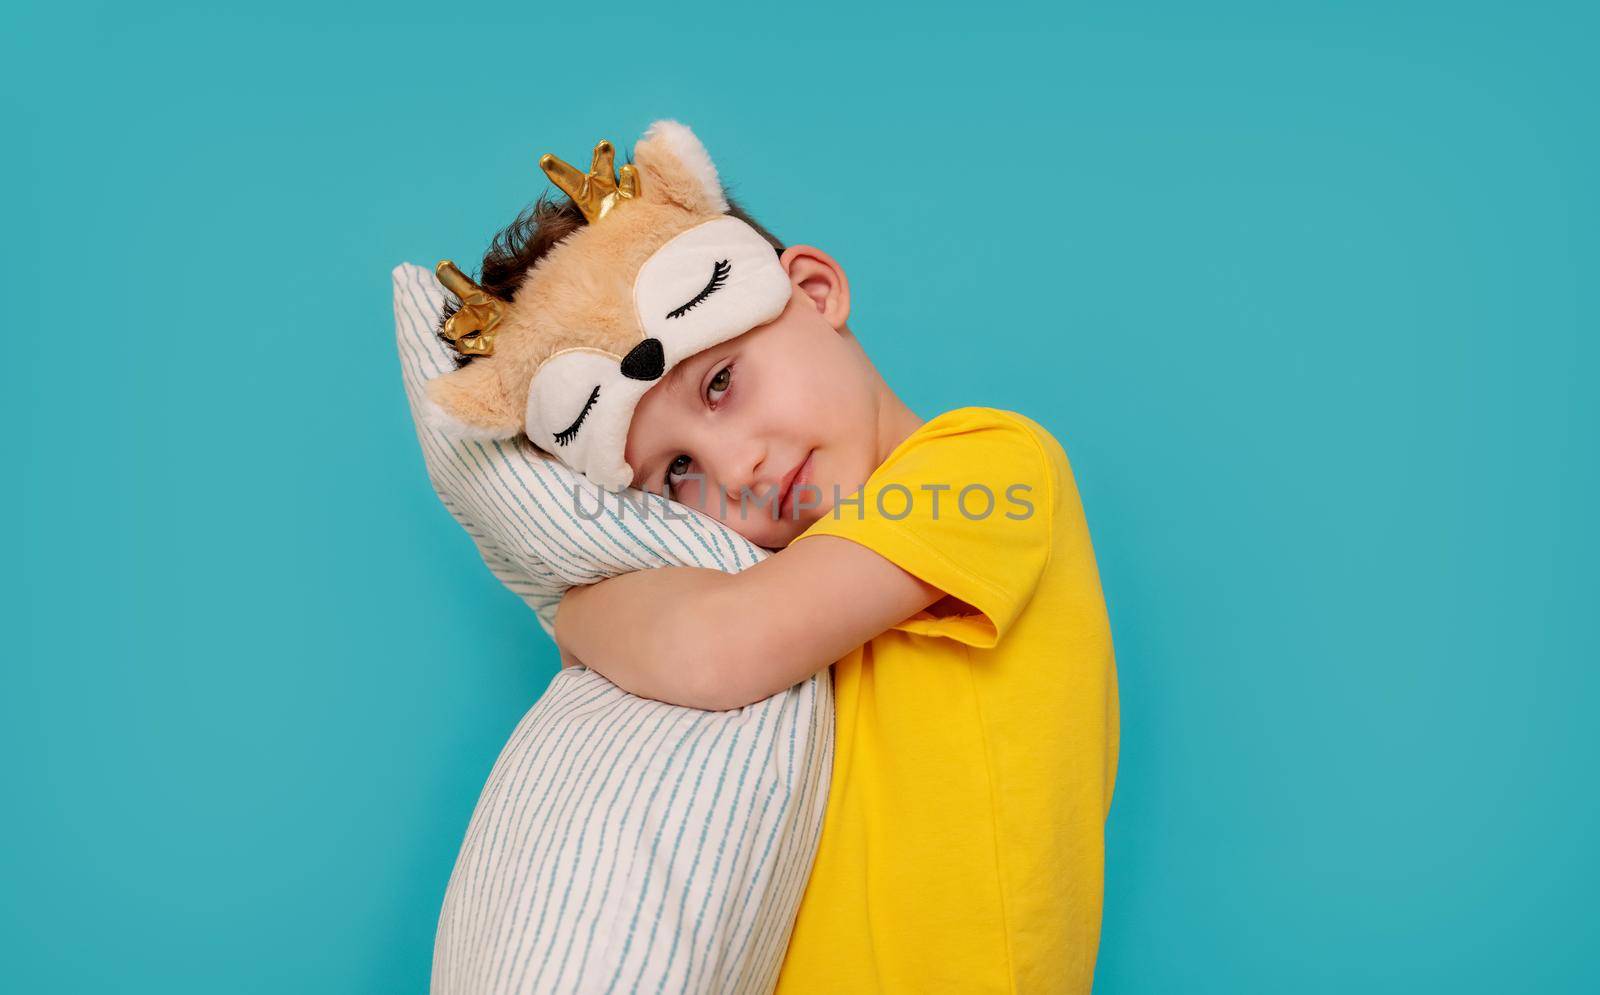 Banner, portrait of a sad boy on a blue background with copy paste. The child hugs the pillow. The boy is wearing yellow pajamas and a sleep mask, deer. Concept, rest, tired child, insomnia